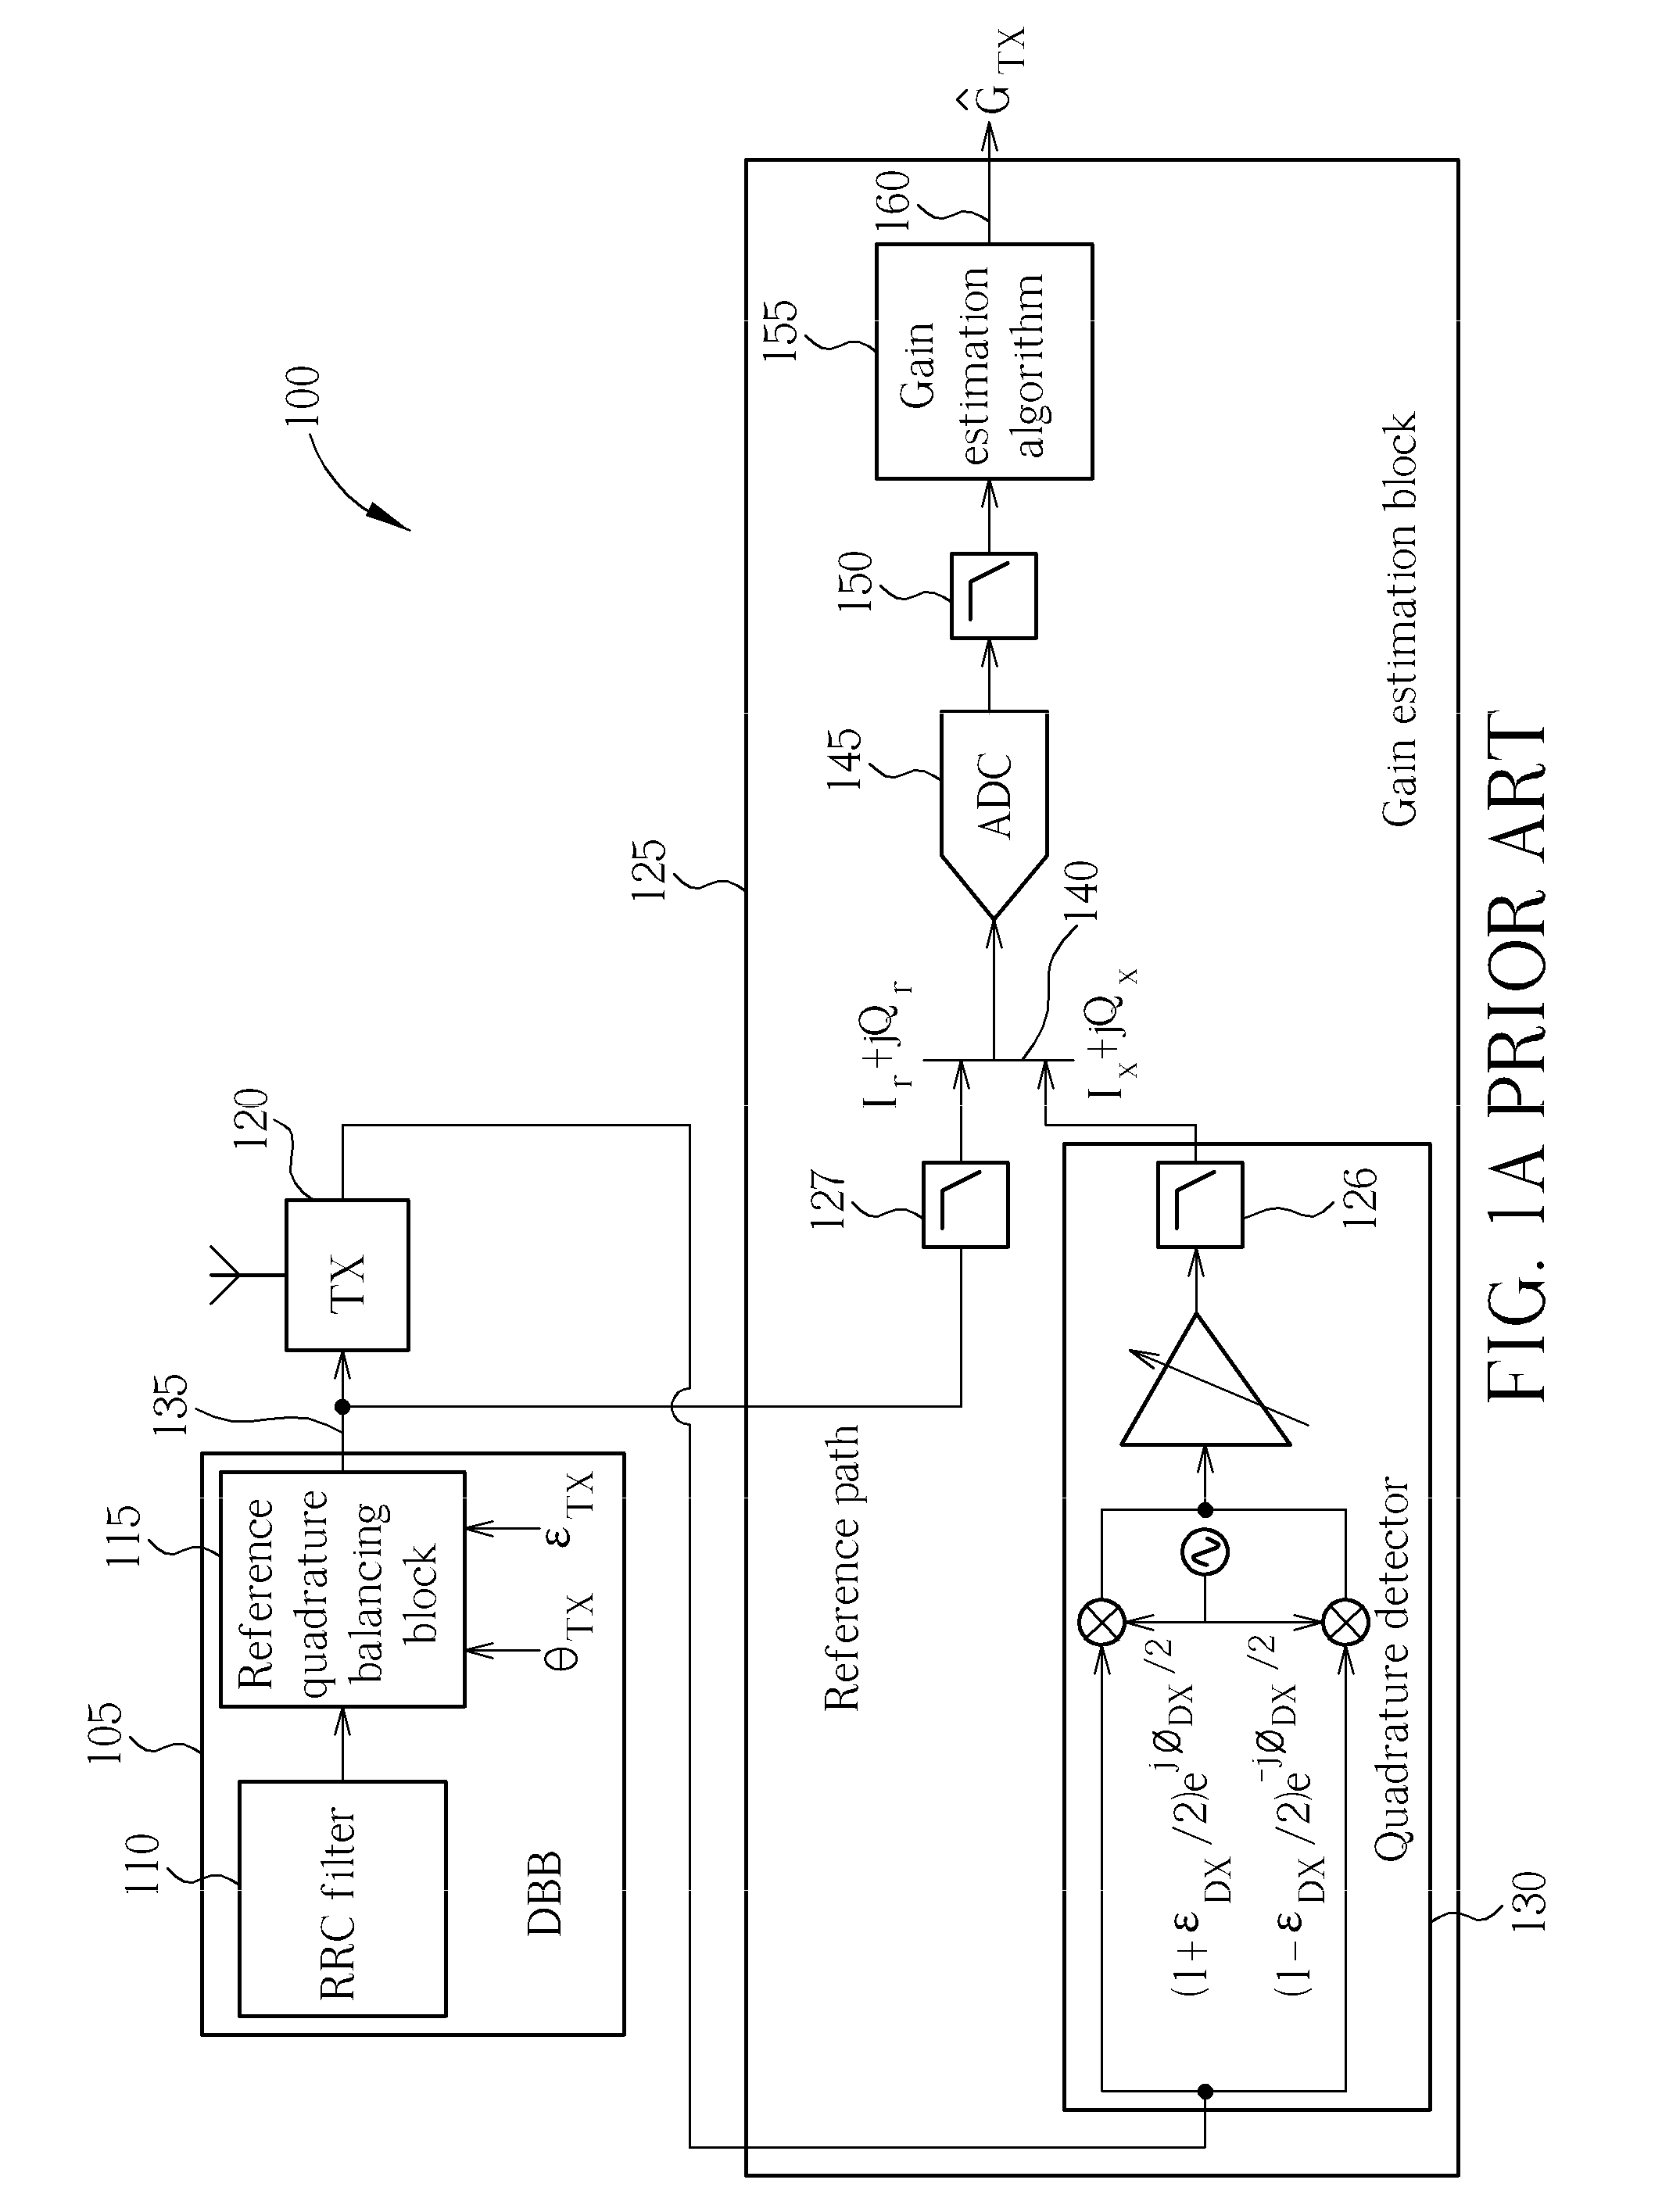 Integrated circuit, wireless communication unit and method for quadrature power detection